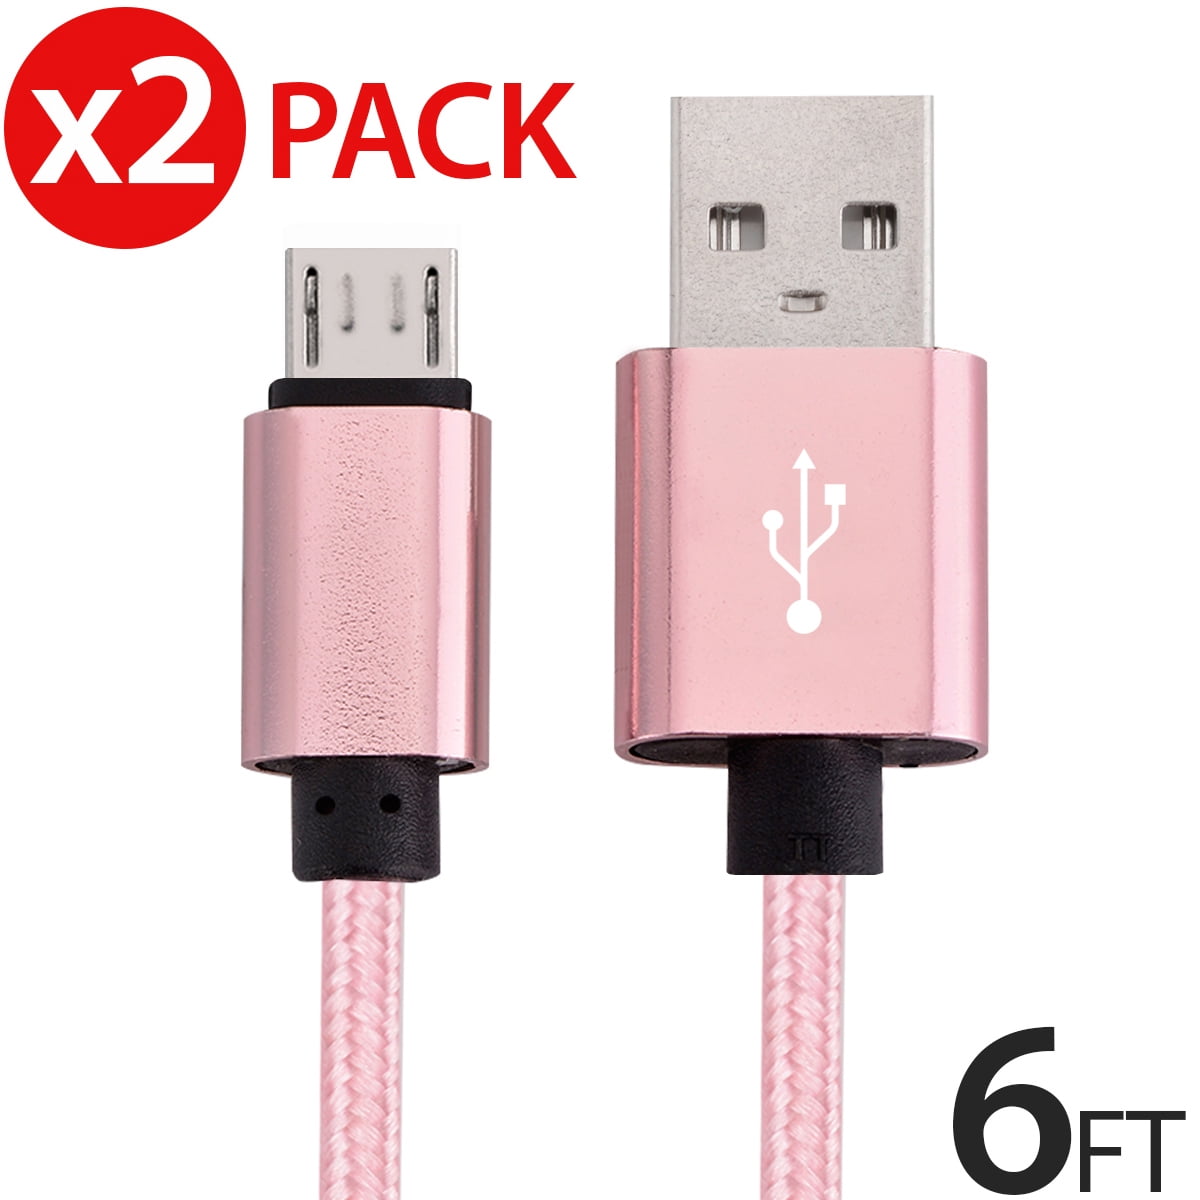 3301168 Casecover Universal Micro USB 3M 10FT Colorful Fabric Braided Data Cable Micro USB Data Sync Cable Charger Charging Cord for Android Samsung Galaxy S2 S3 S4 Note 2 HTC EVO One X S red 